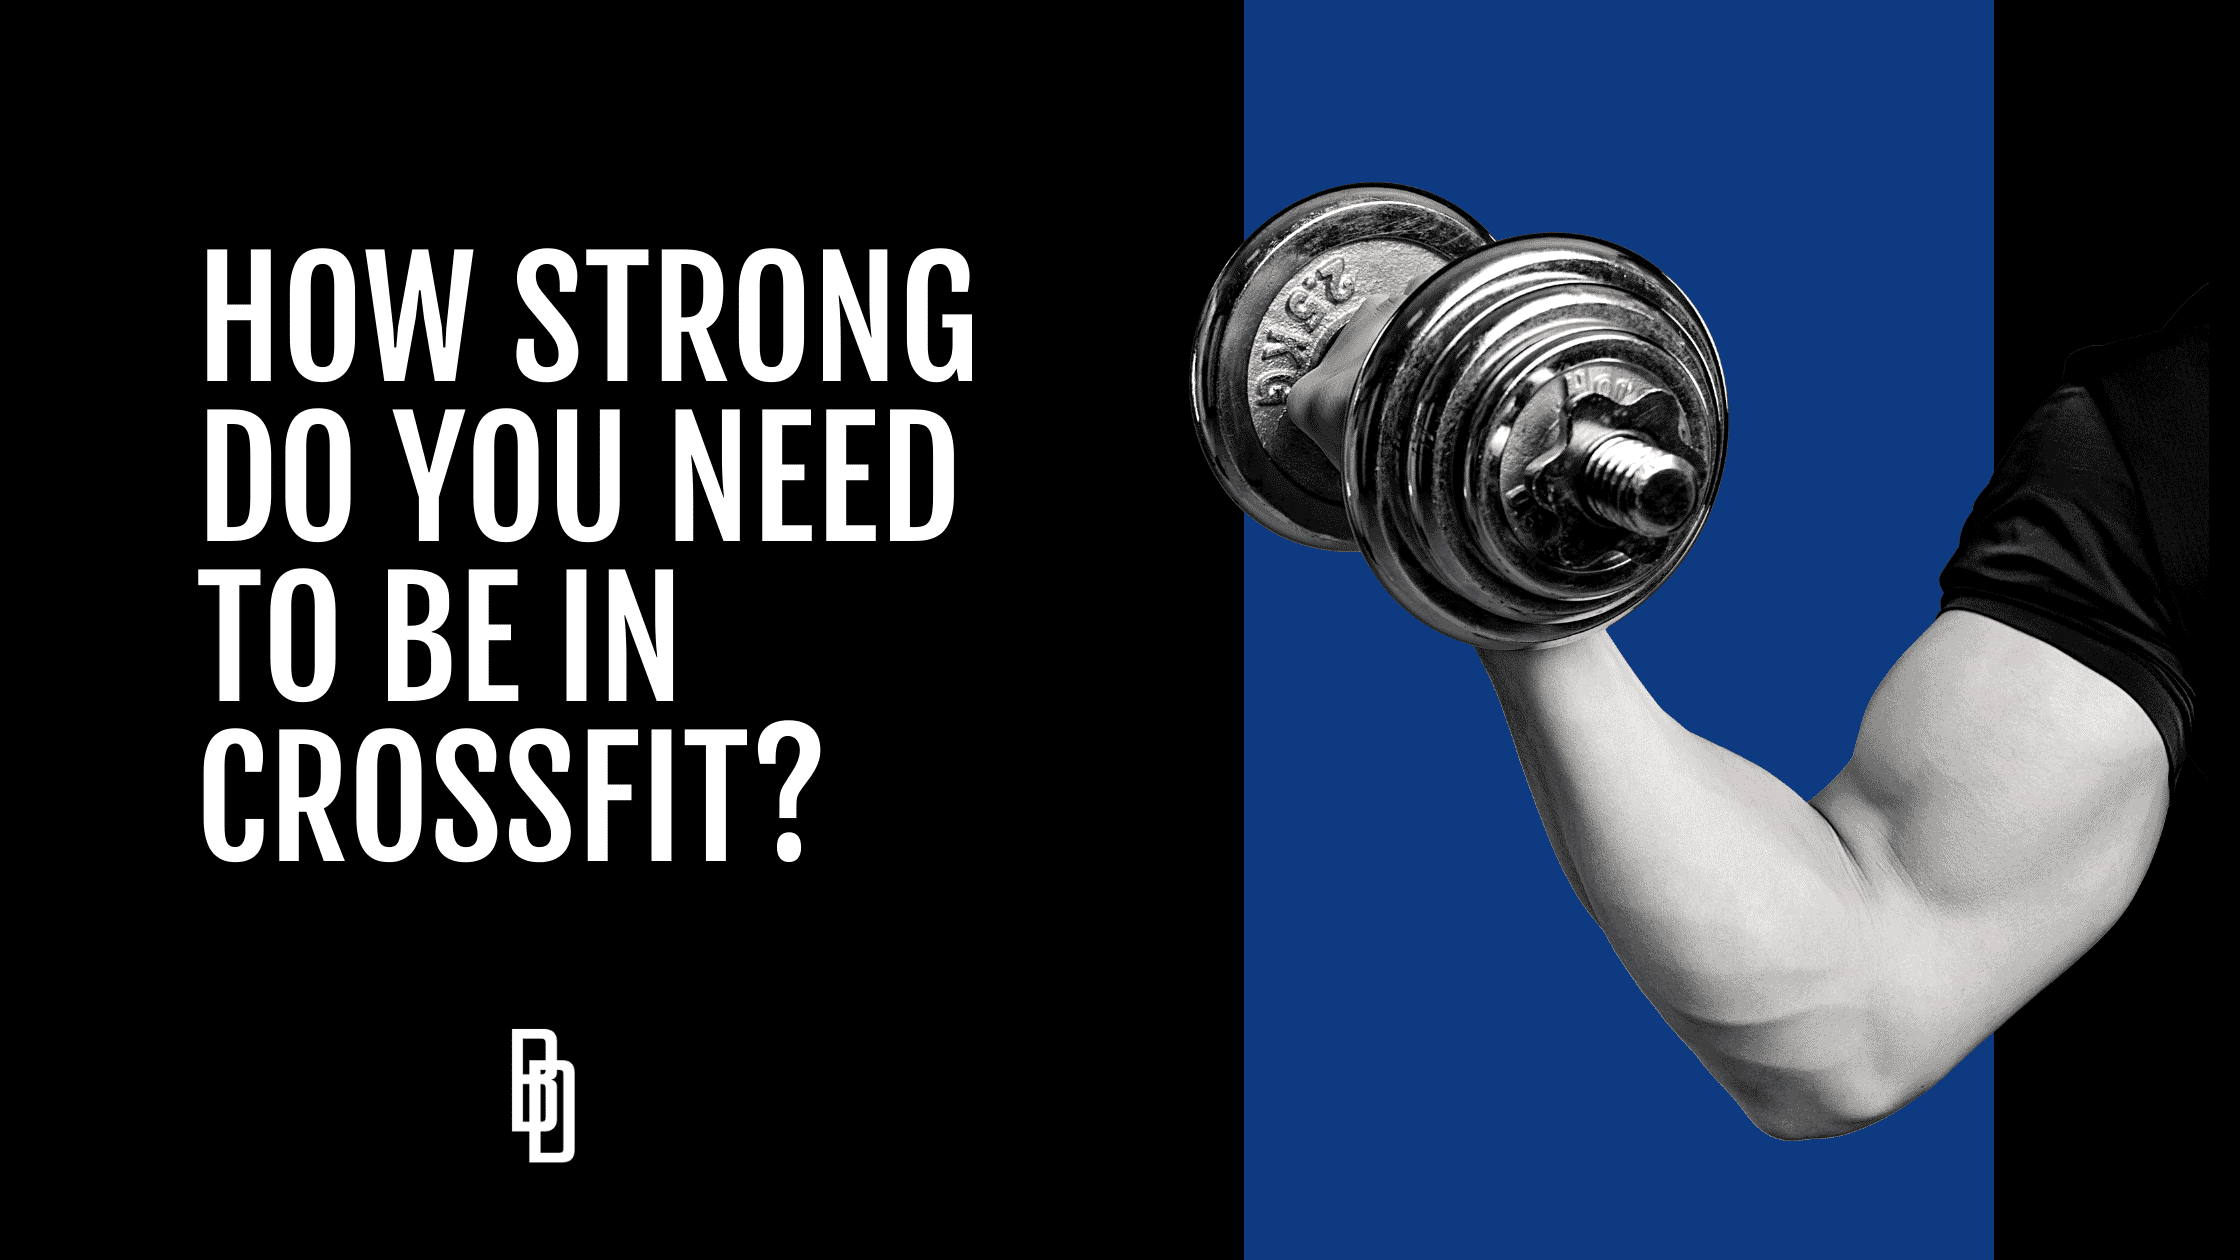 How strong do you need to be in CrossFit?